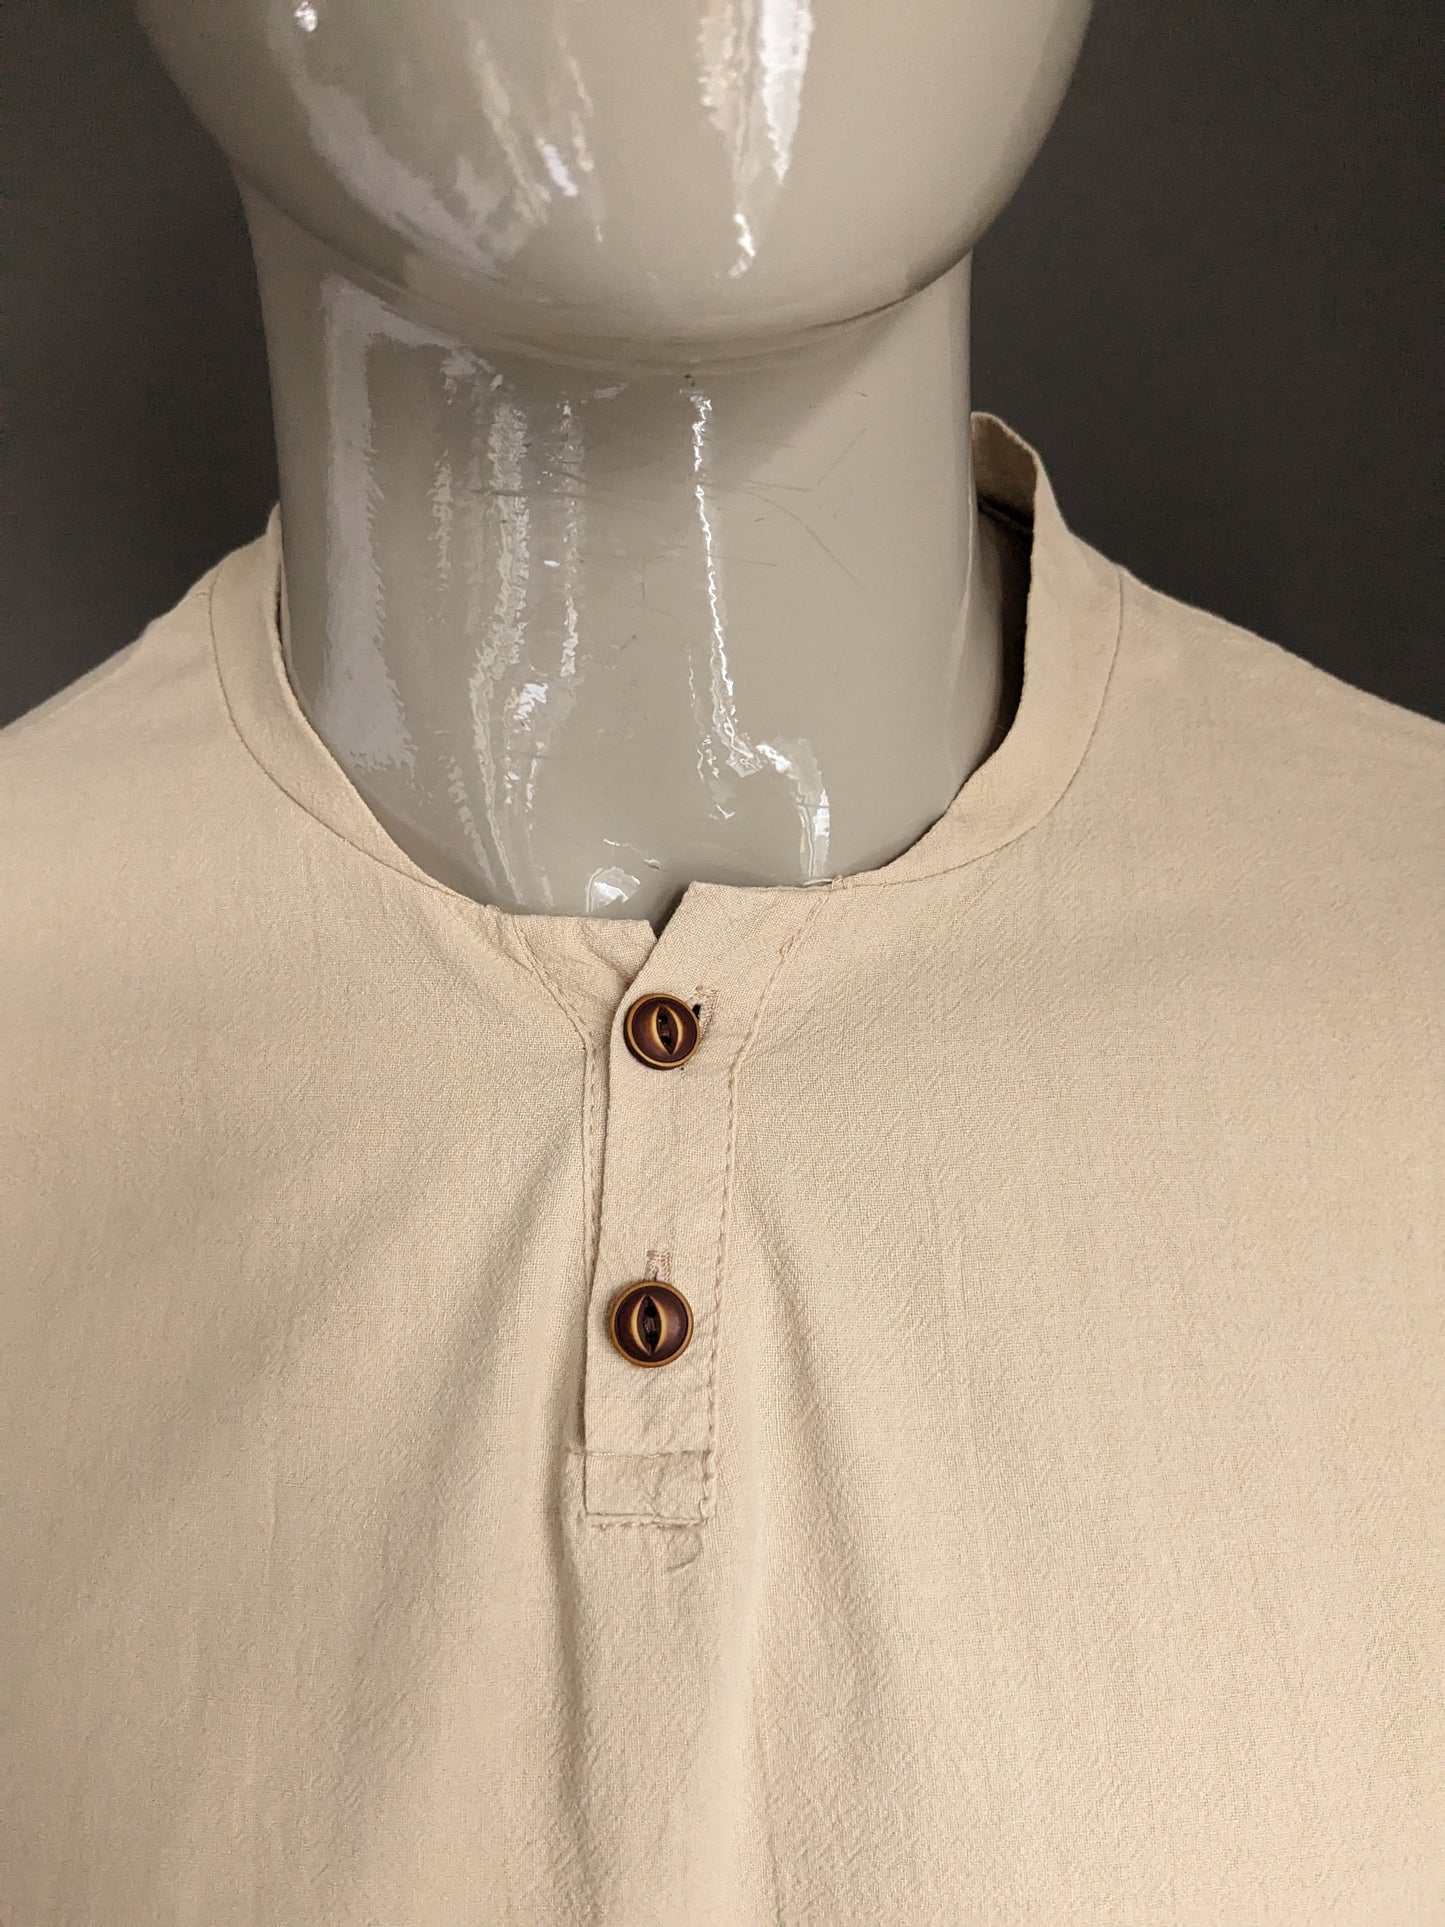 Vintage shirt / polo with mao / raised collar and buttons. Beige. Size L.